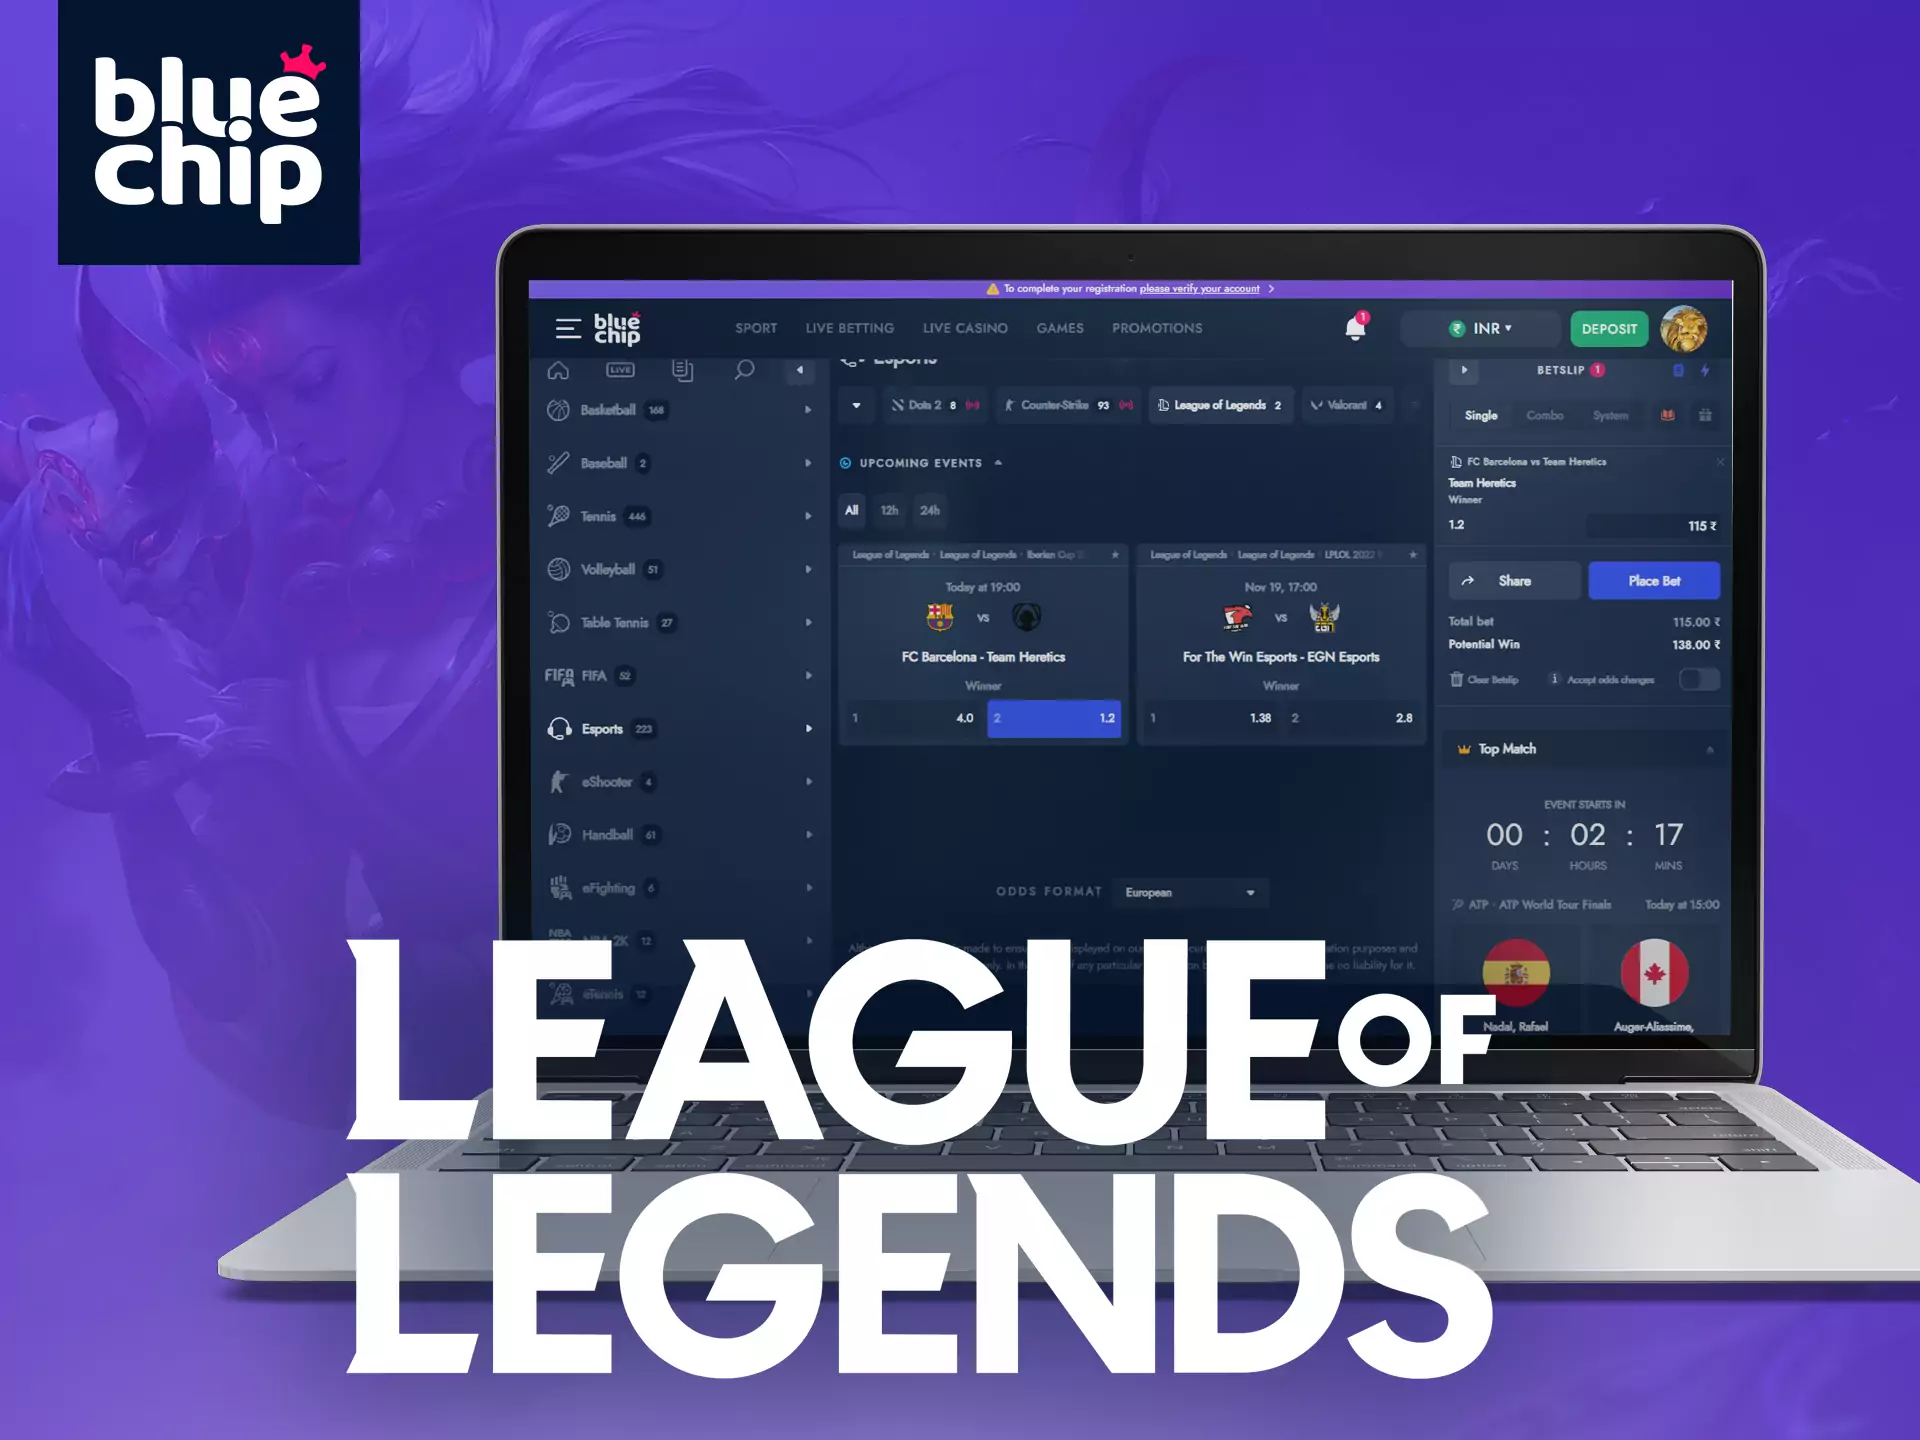 You can bet on the League of Legends events in the Bluechip sportsbook.